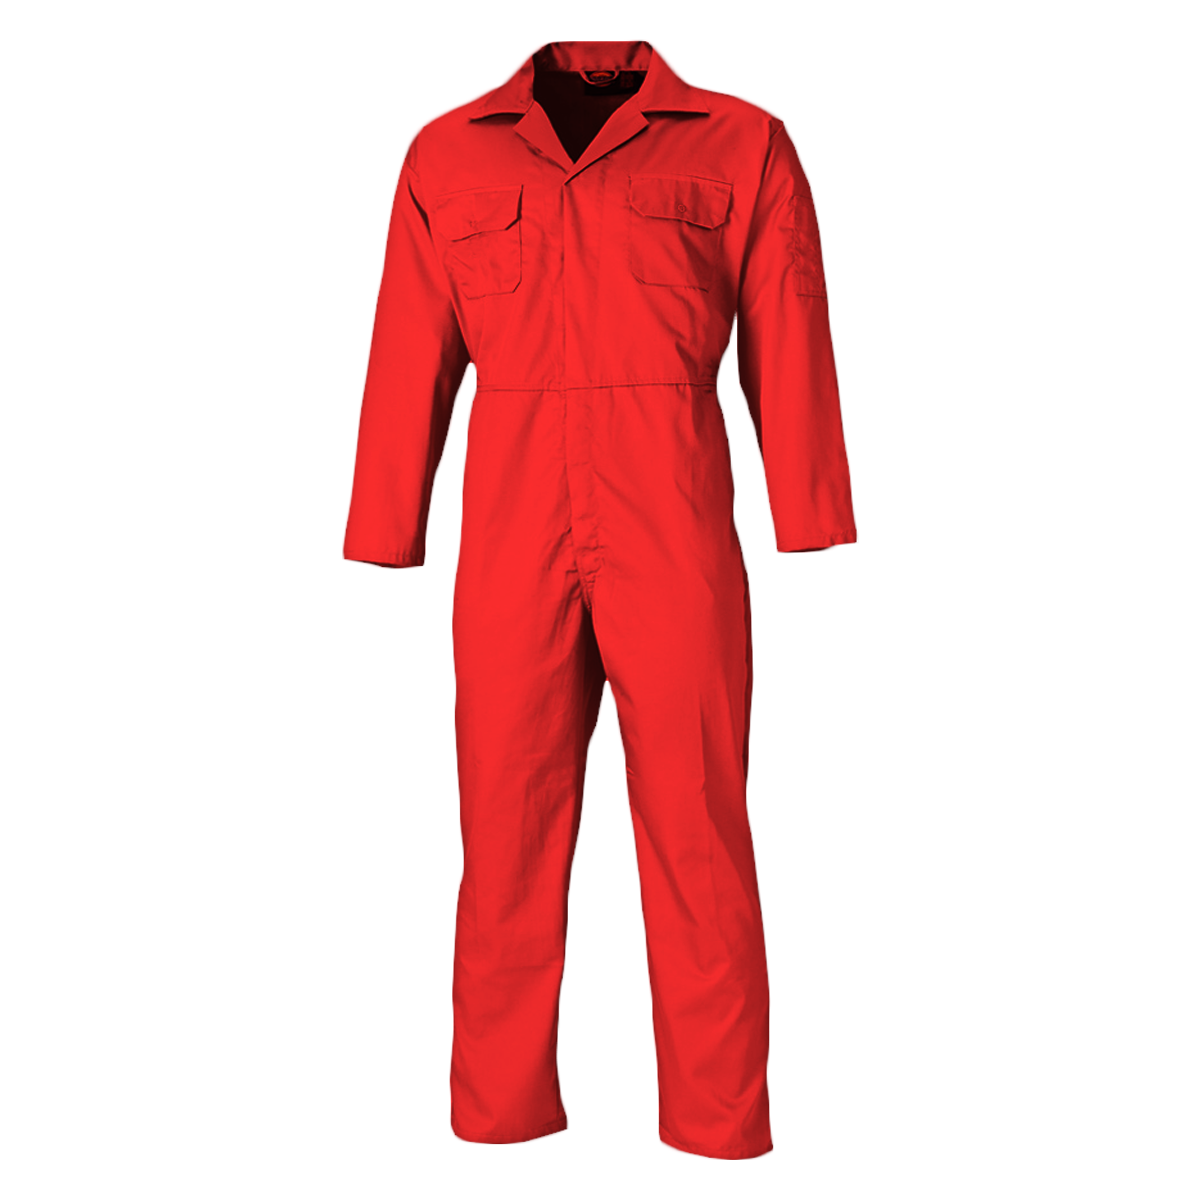 Overall Plain - Red